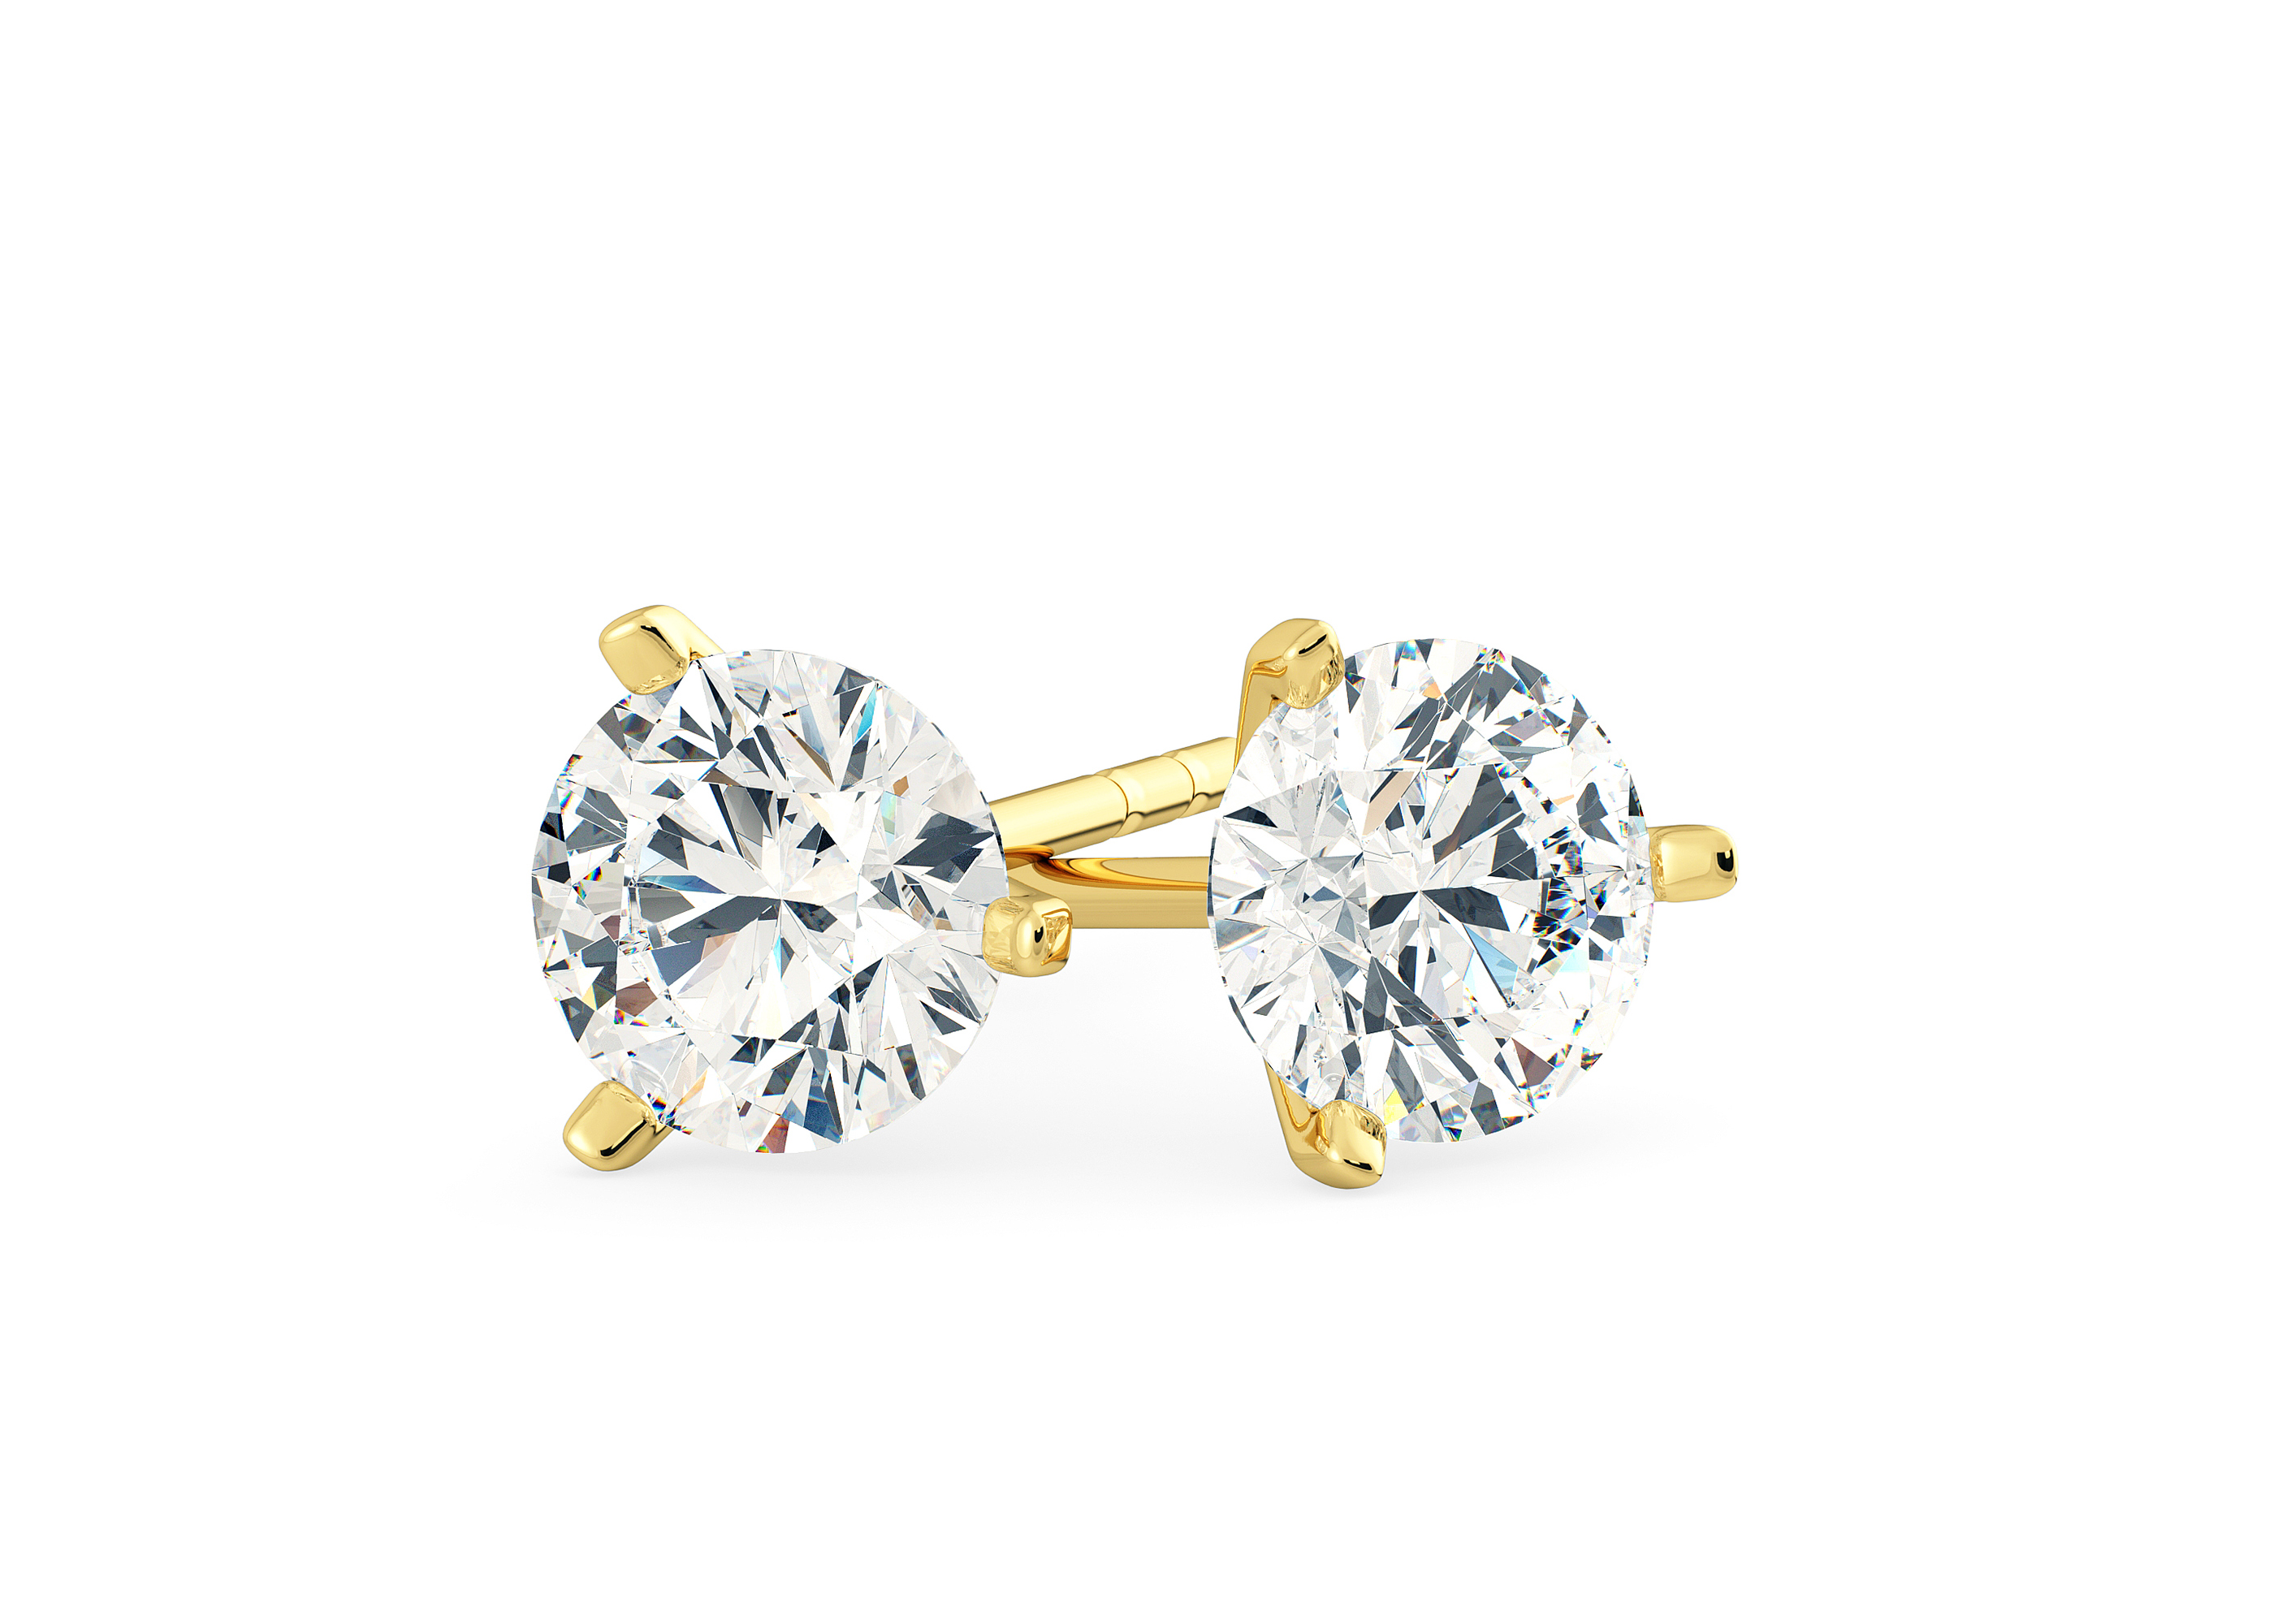 Alegra Round Brilliant Diamond Stud Earrings in in 18K Yellow Gold with Alpha Backs